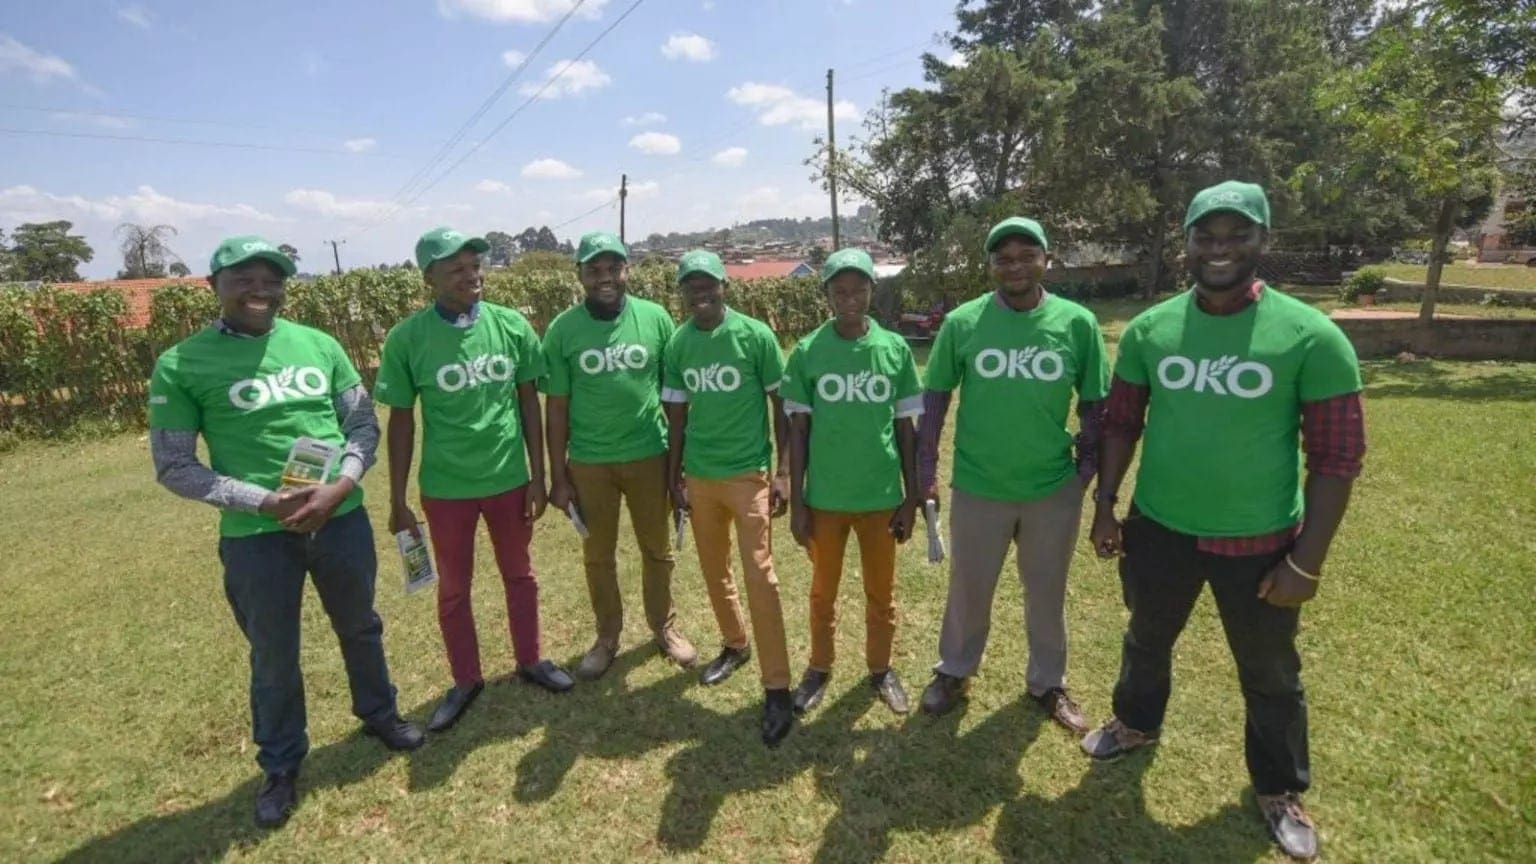 Insurtech start-up OKO raises US$1.2m to bring innovative products to smallholder farmers in Africa